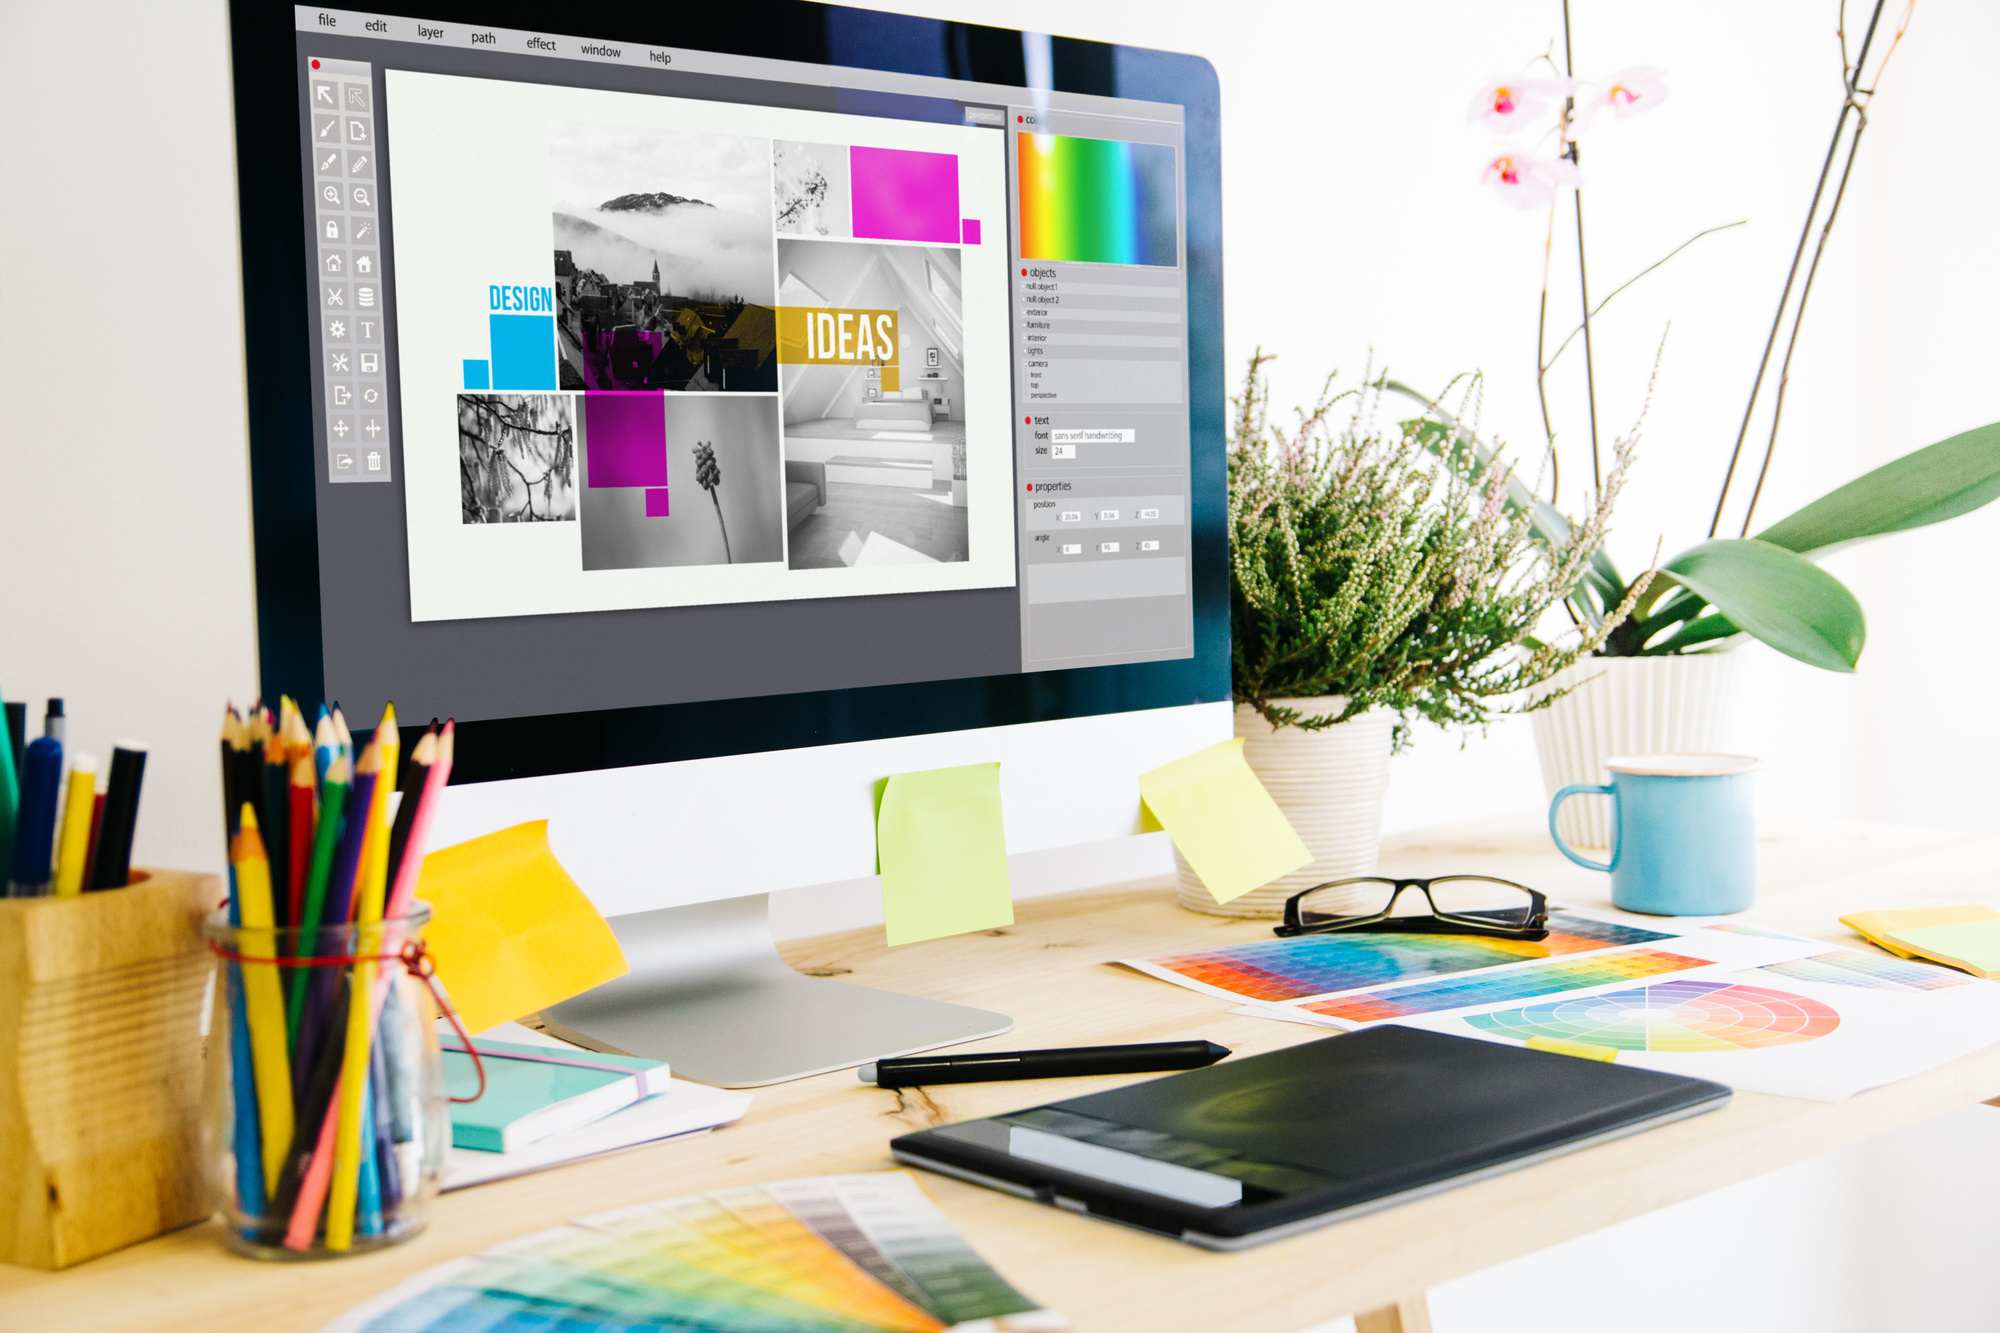 5 Exciting Website Design Trends to Watch